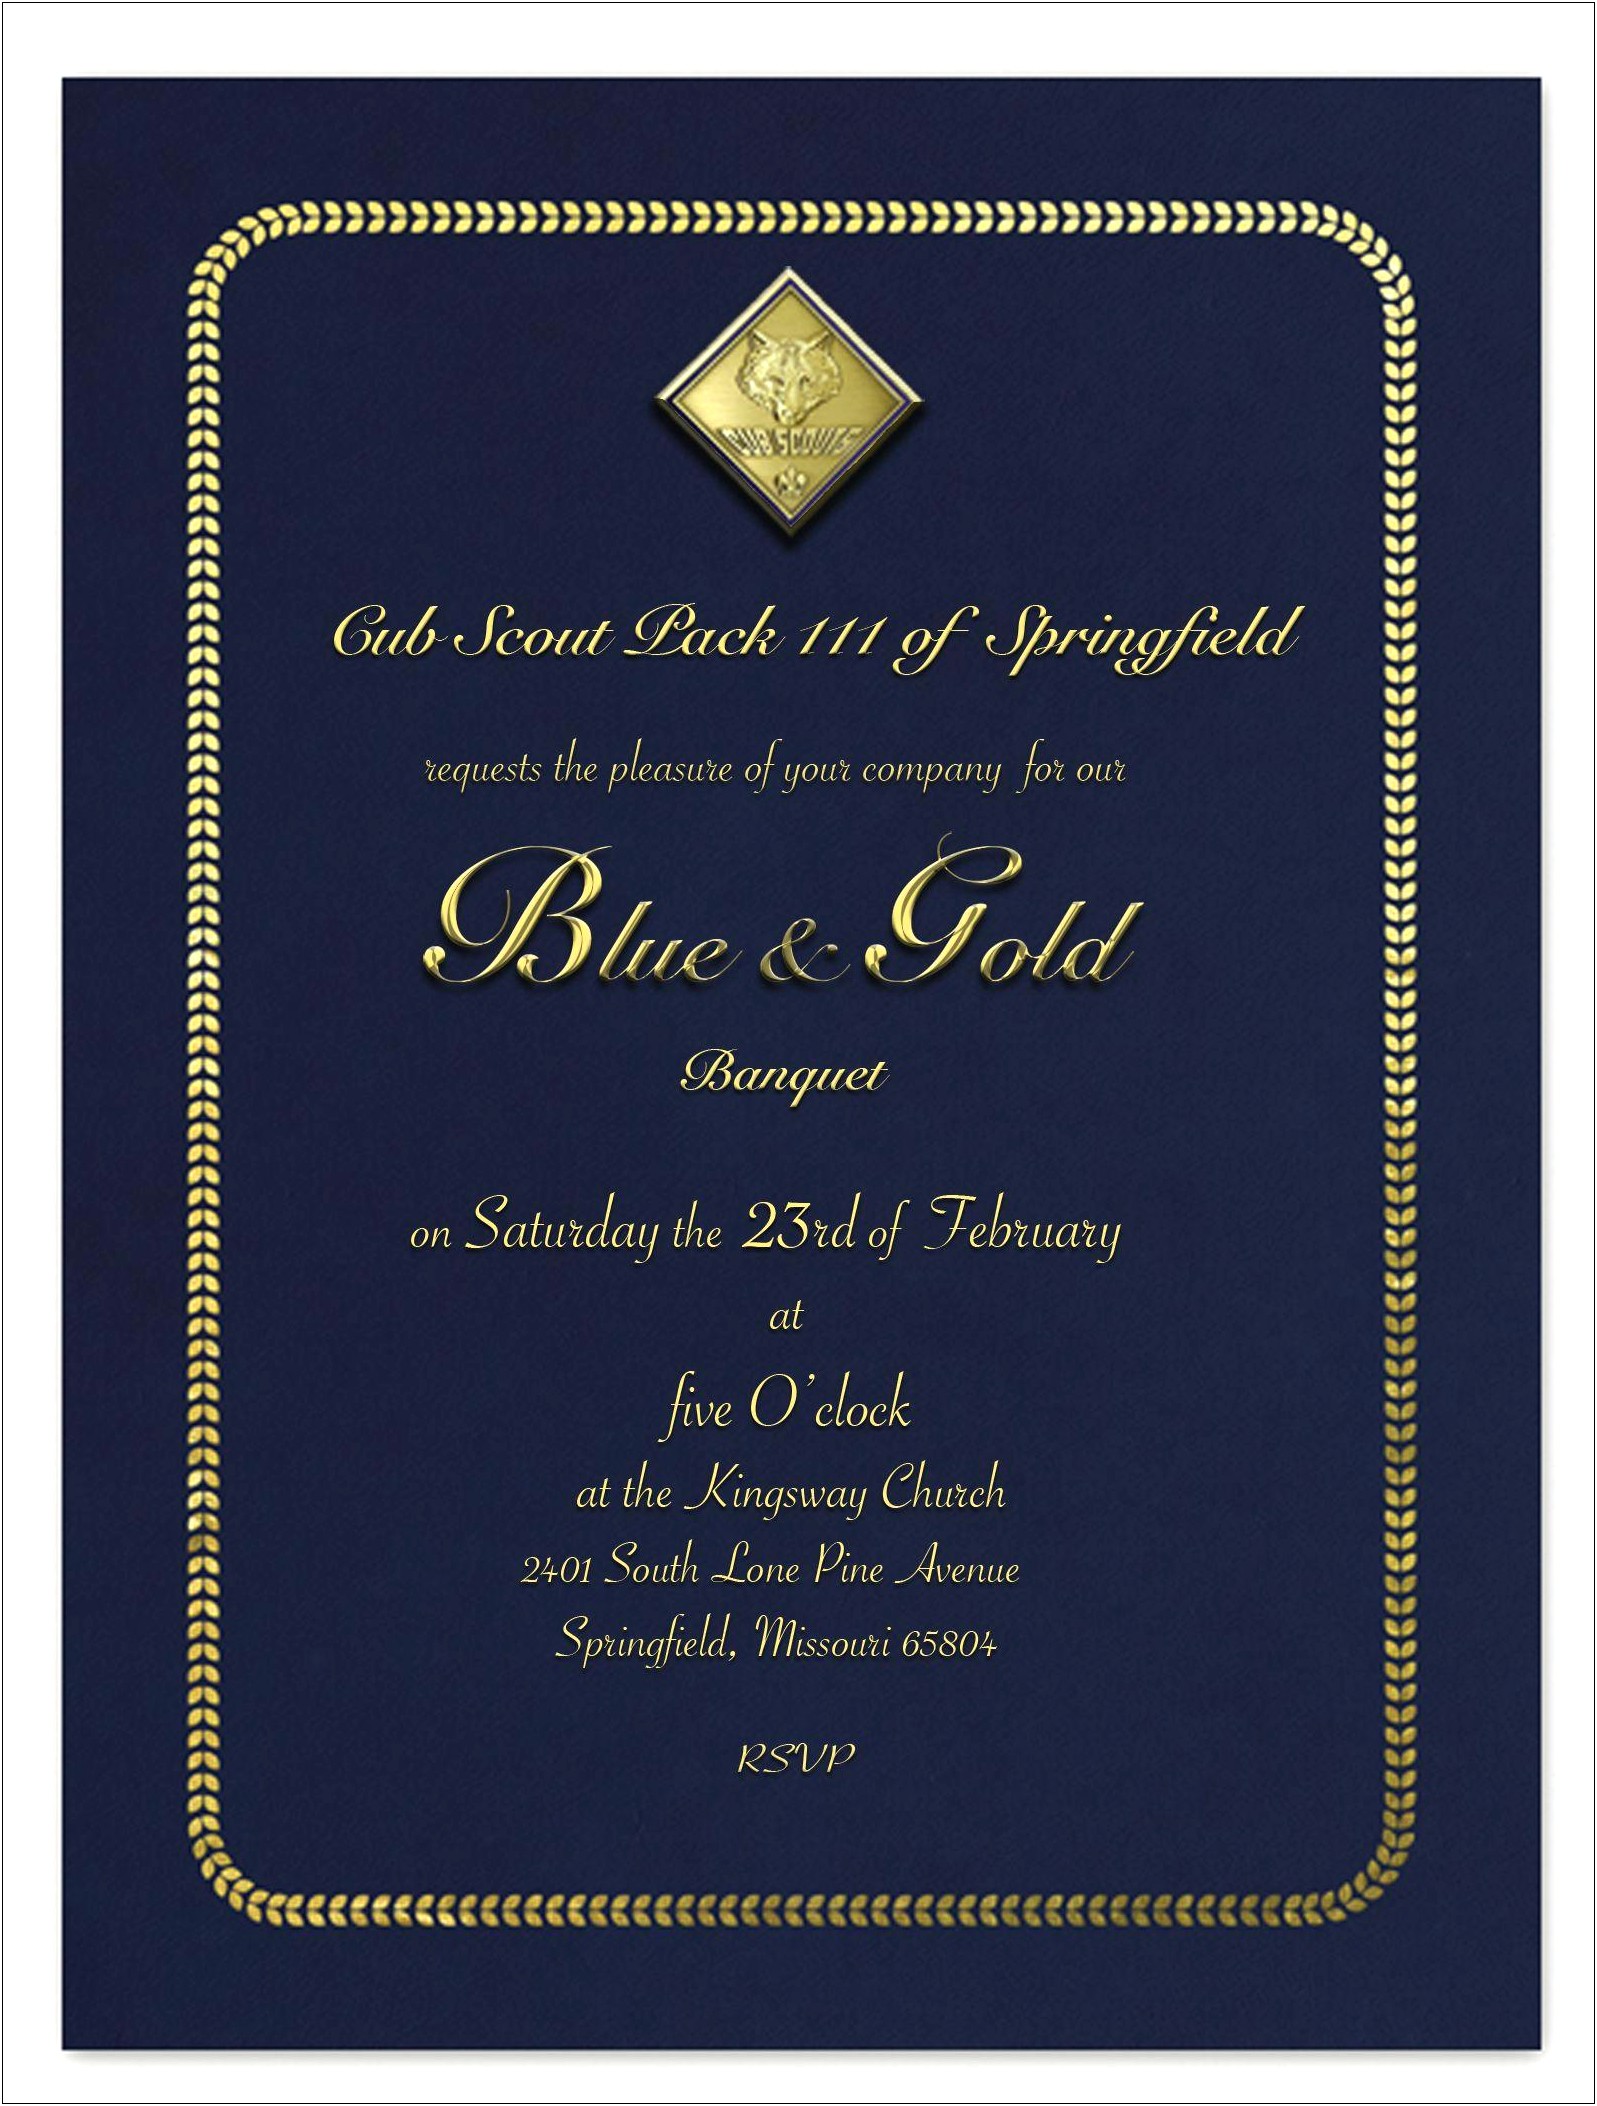 Blue And Gold Banquet Program Word Template